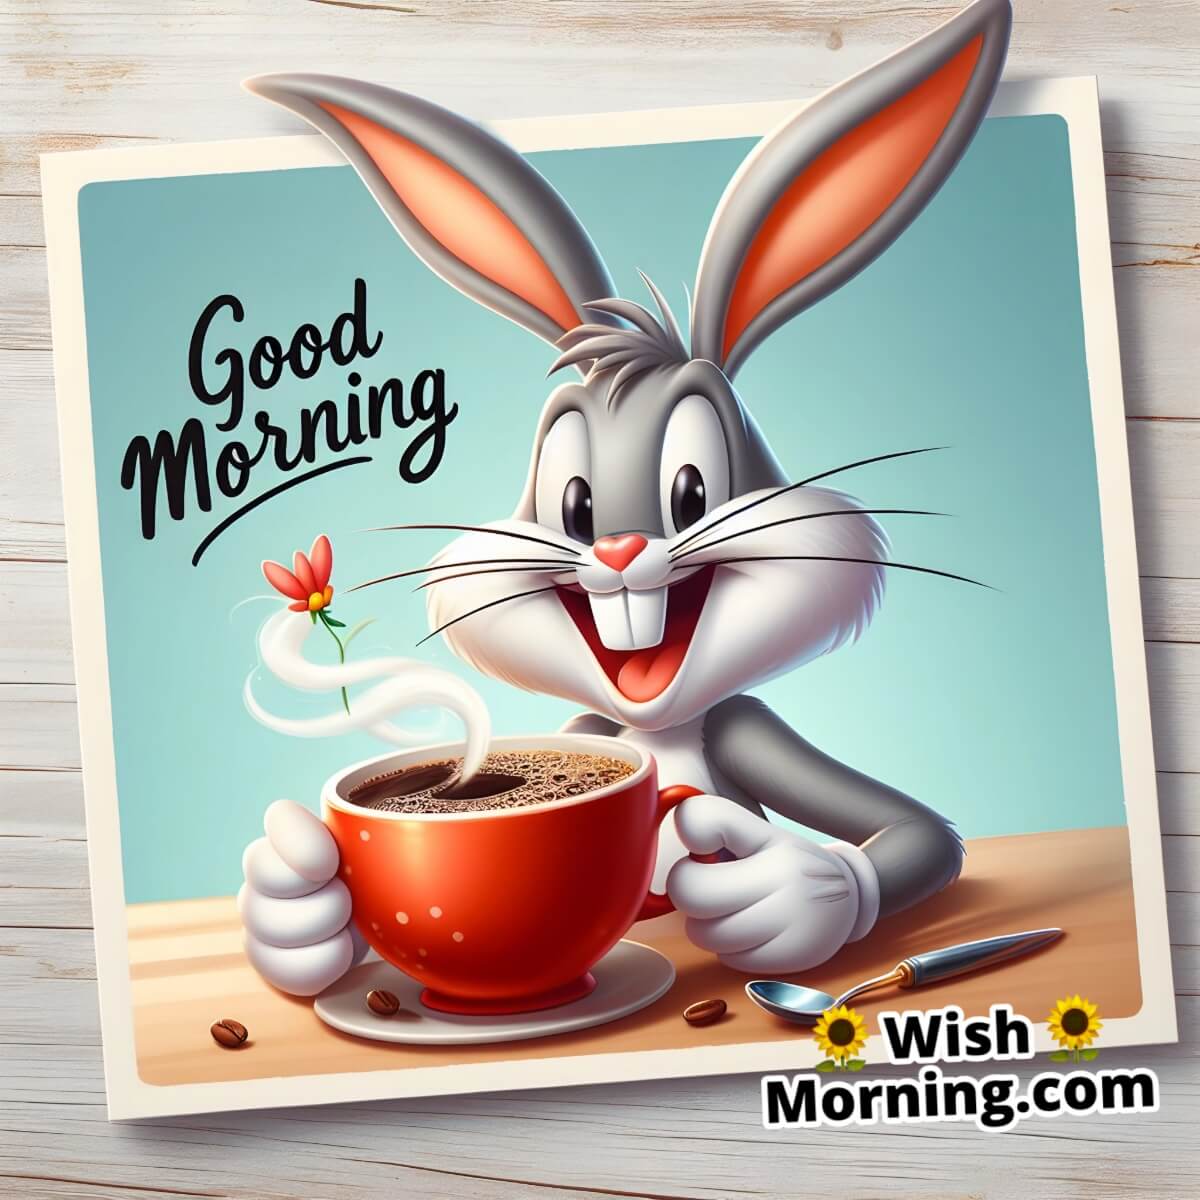 Good Morning Bugs Bunny Images